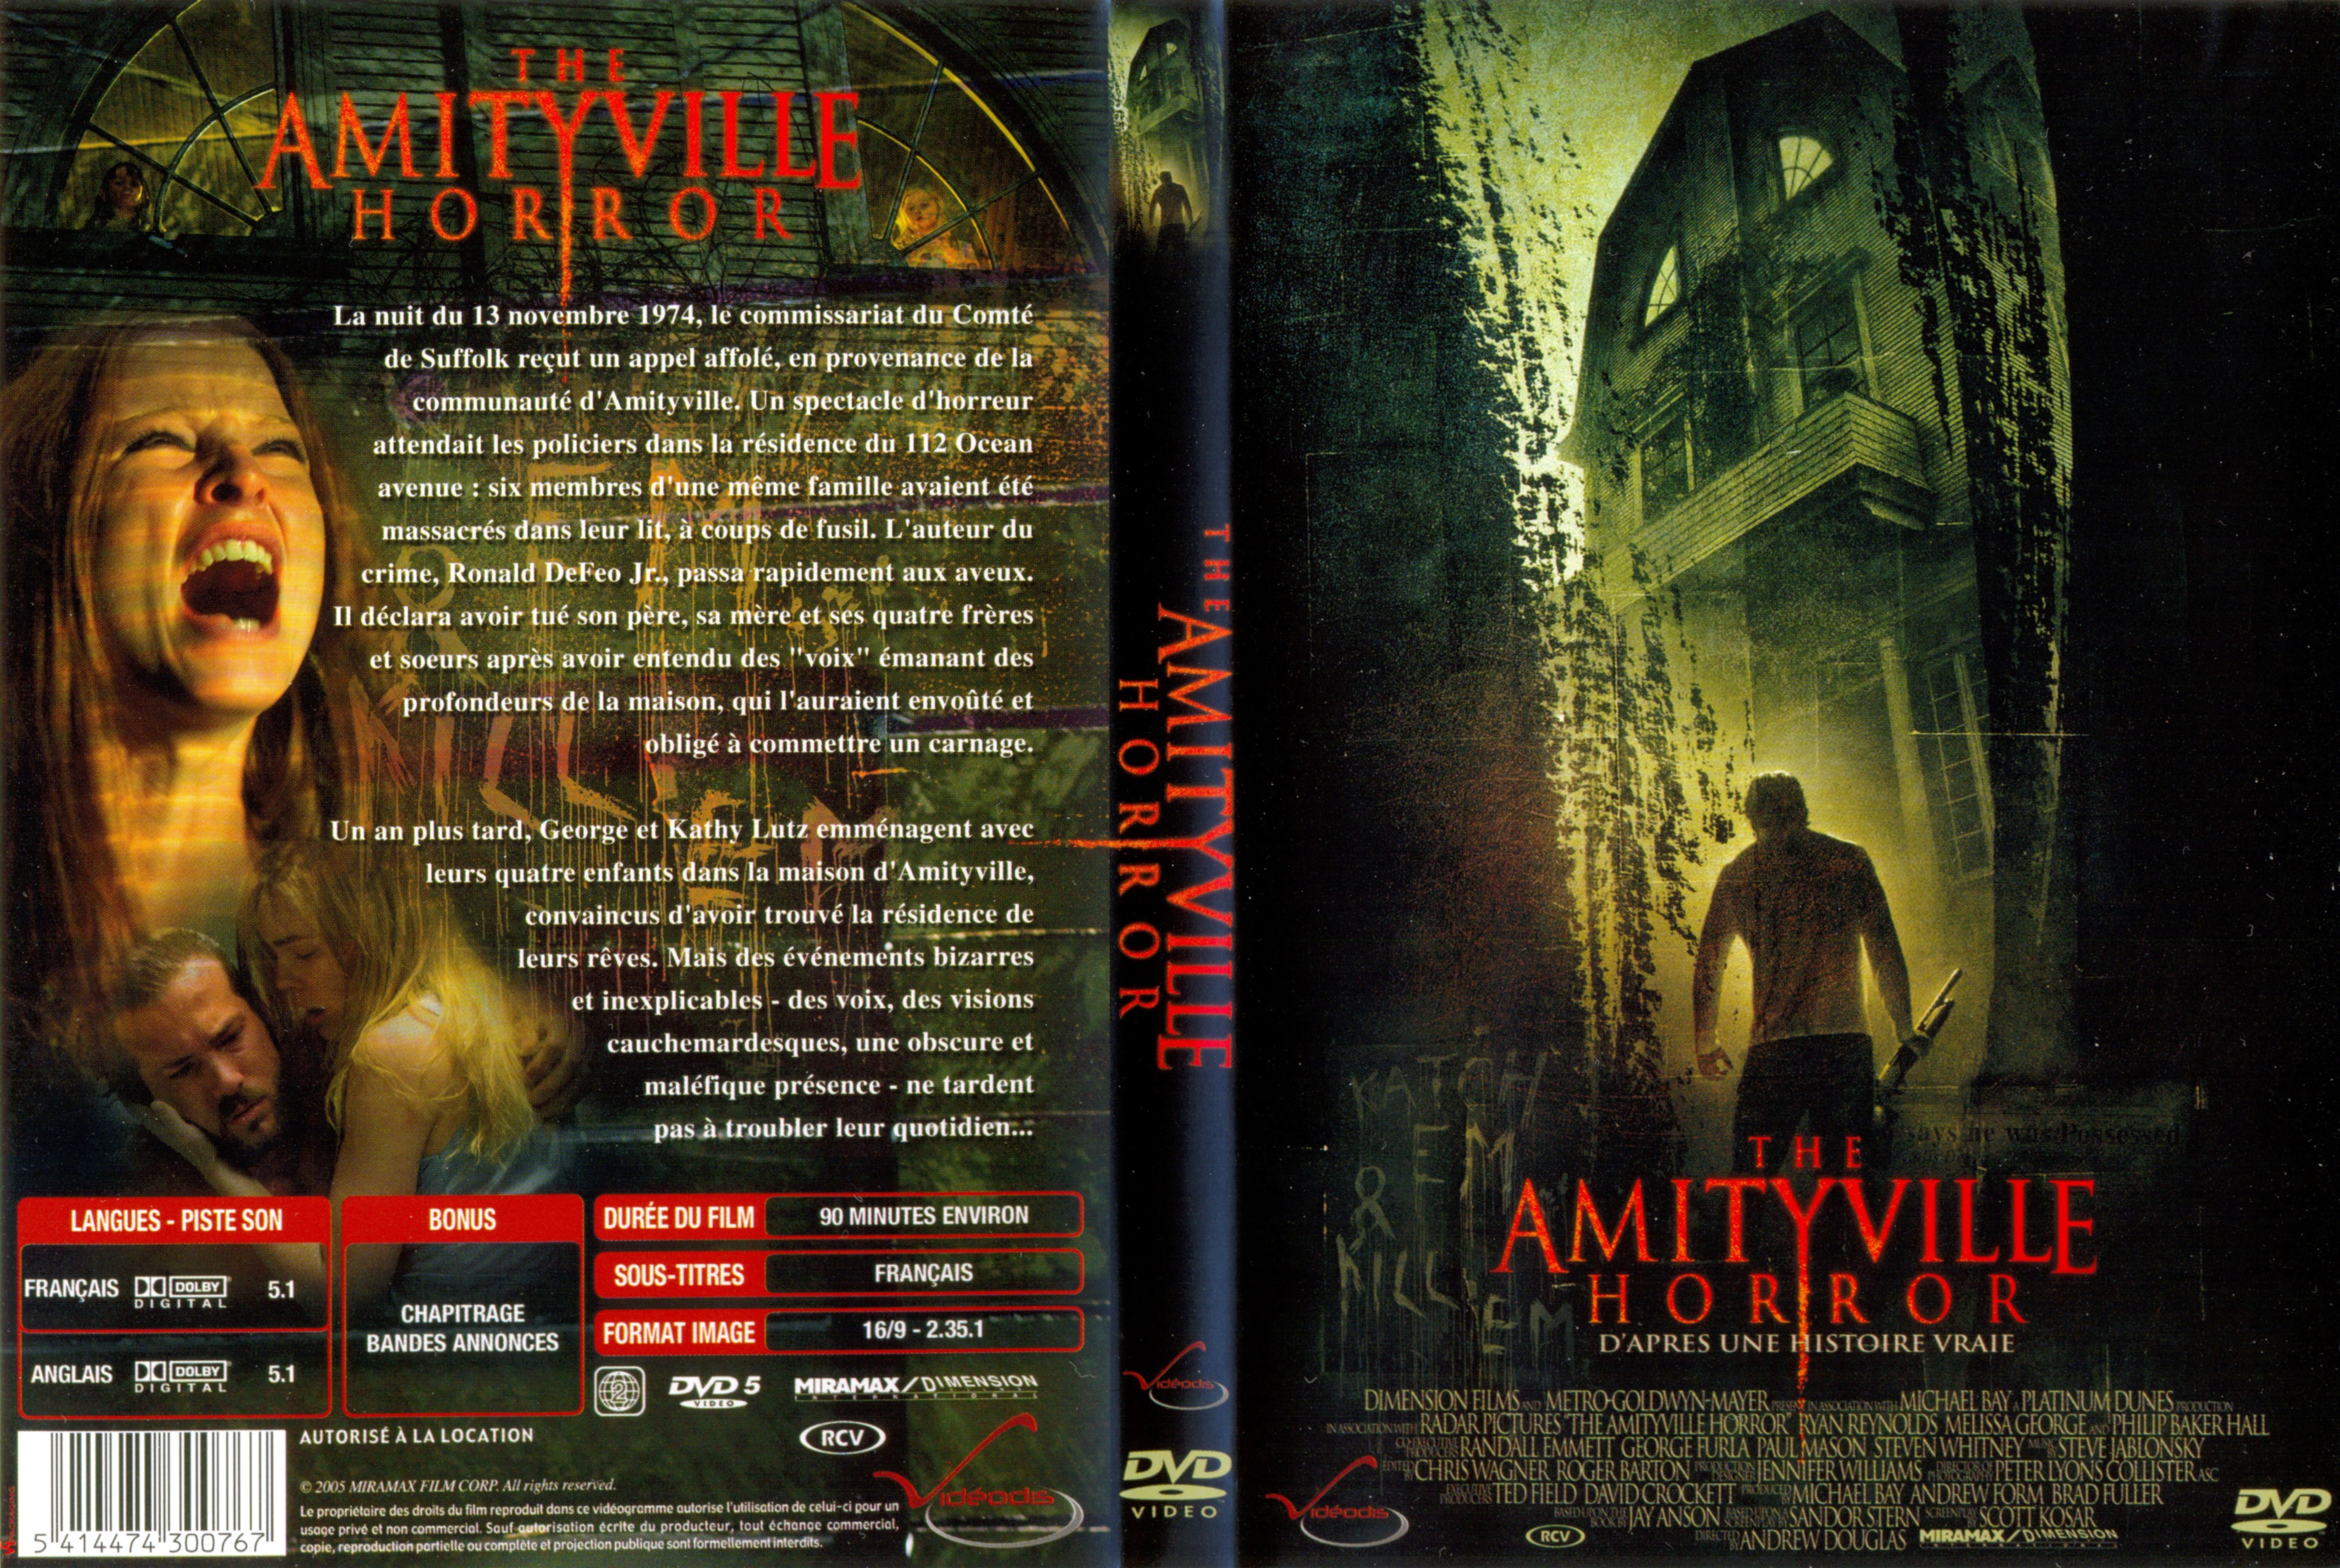 Jaquette DVD The amityville horror